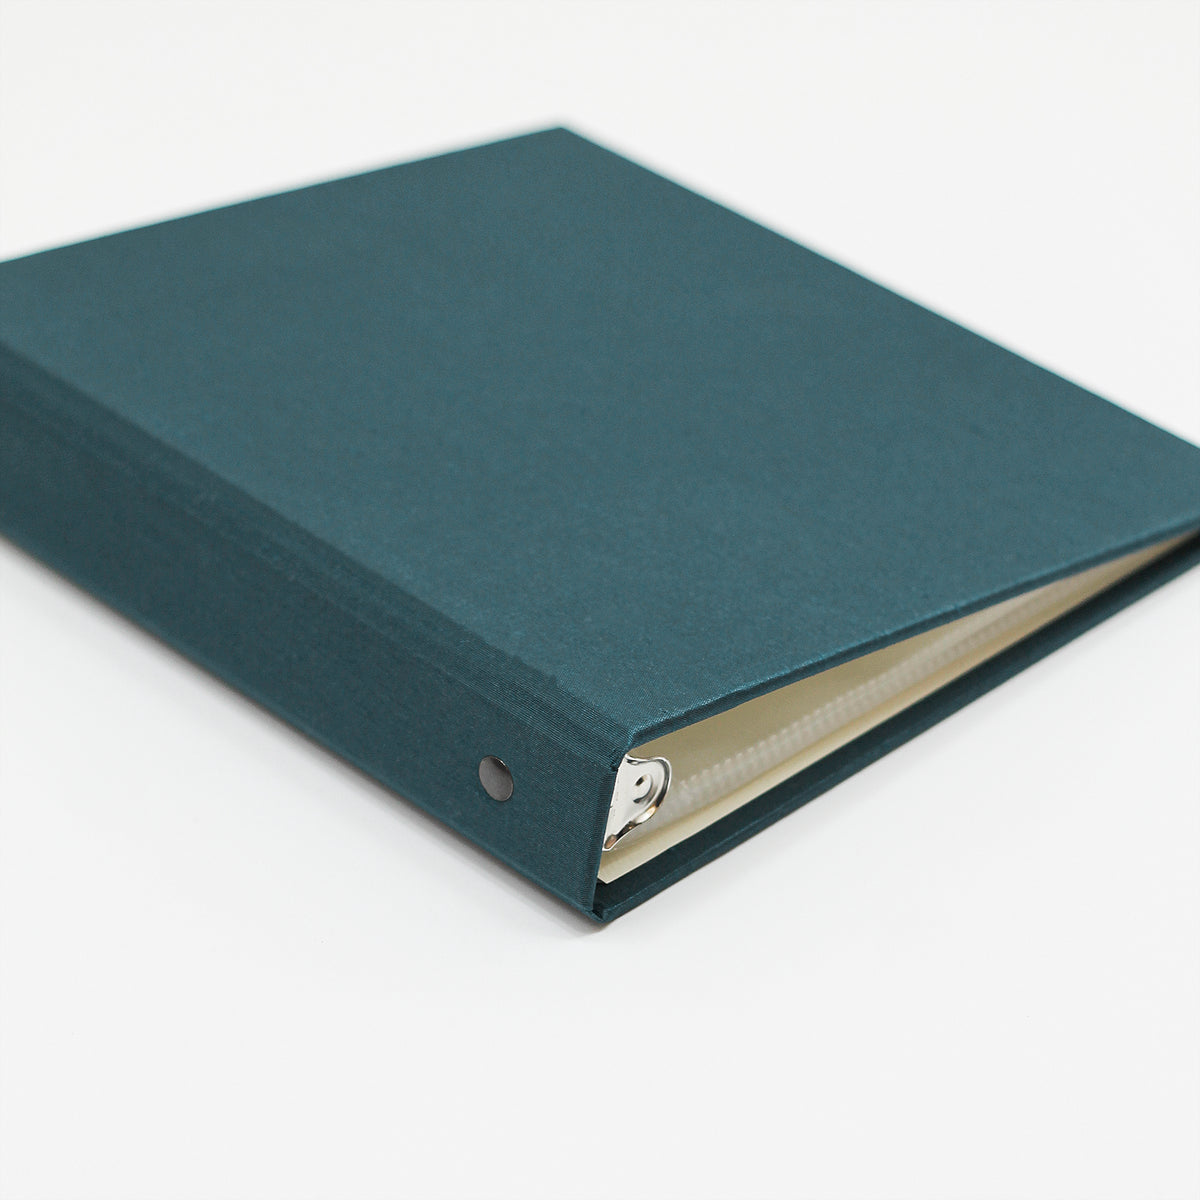 Medium Postcard Album | Cover: Teal Blue Silk | Available Personalized